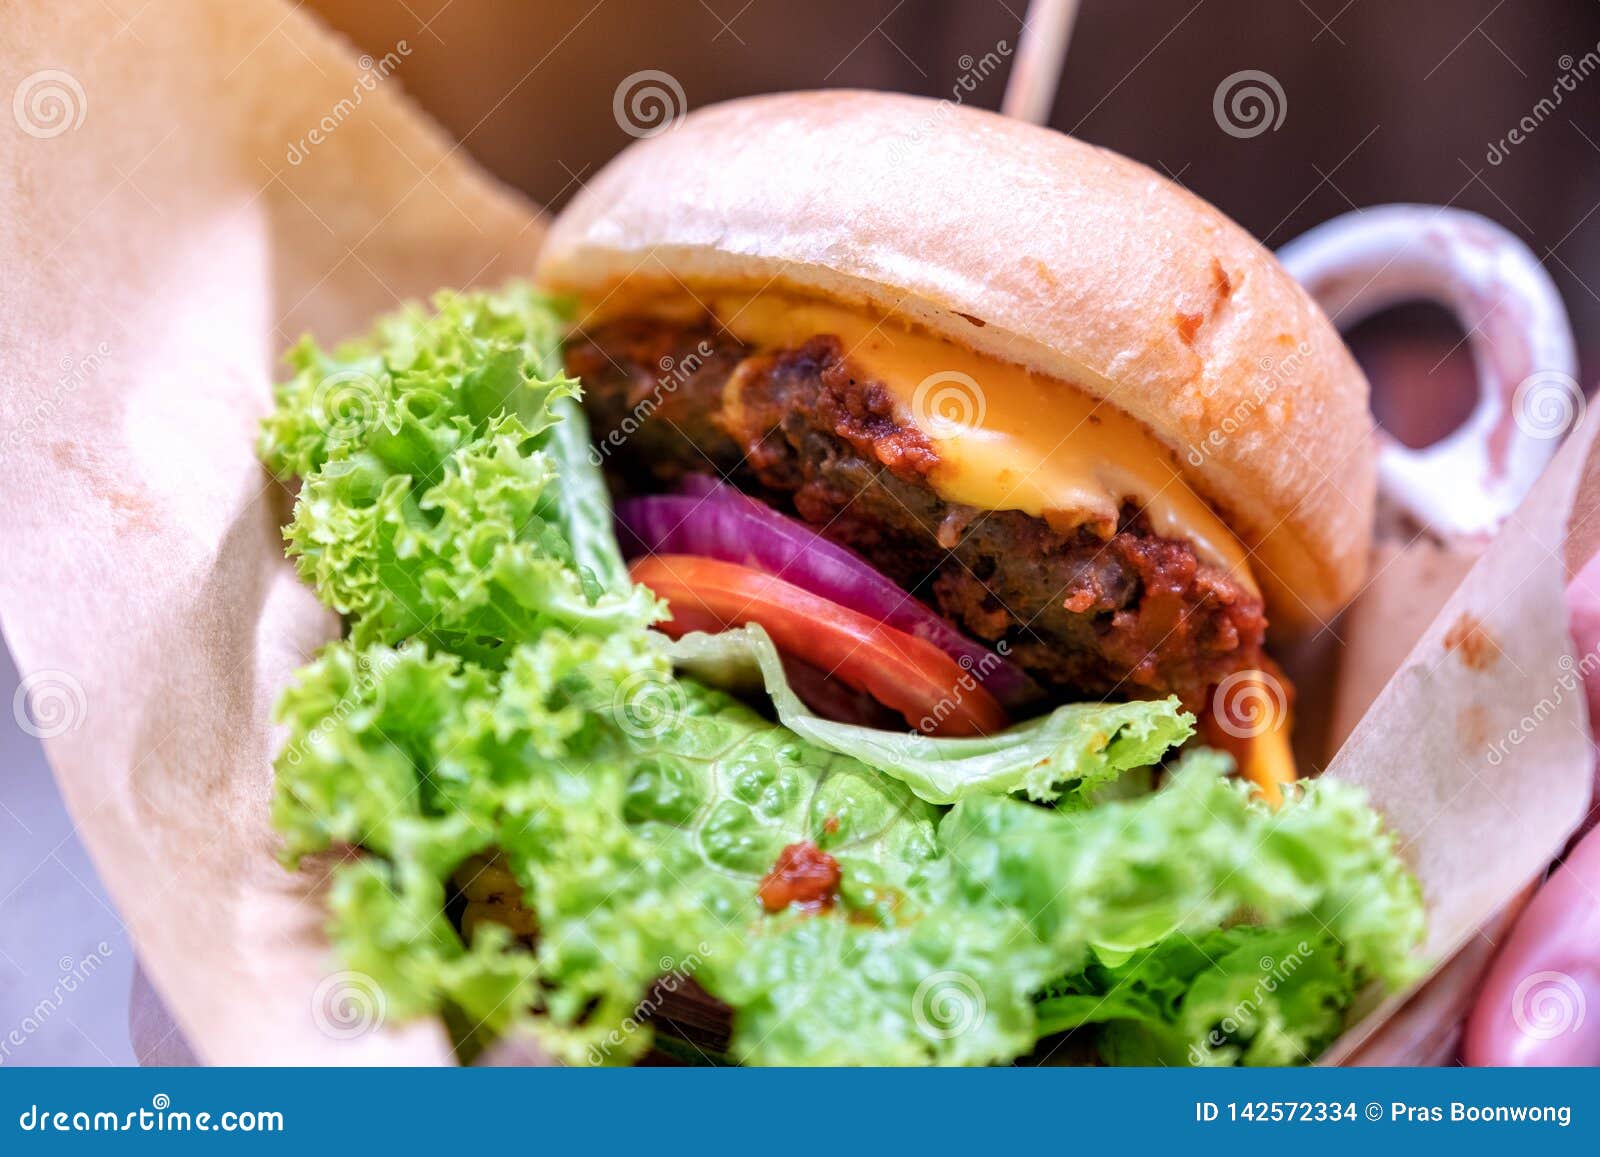 A Beef Cheeseburger in Restaurant Stock Photo - Image of bowl, burger ...